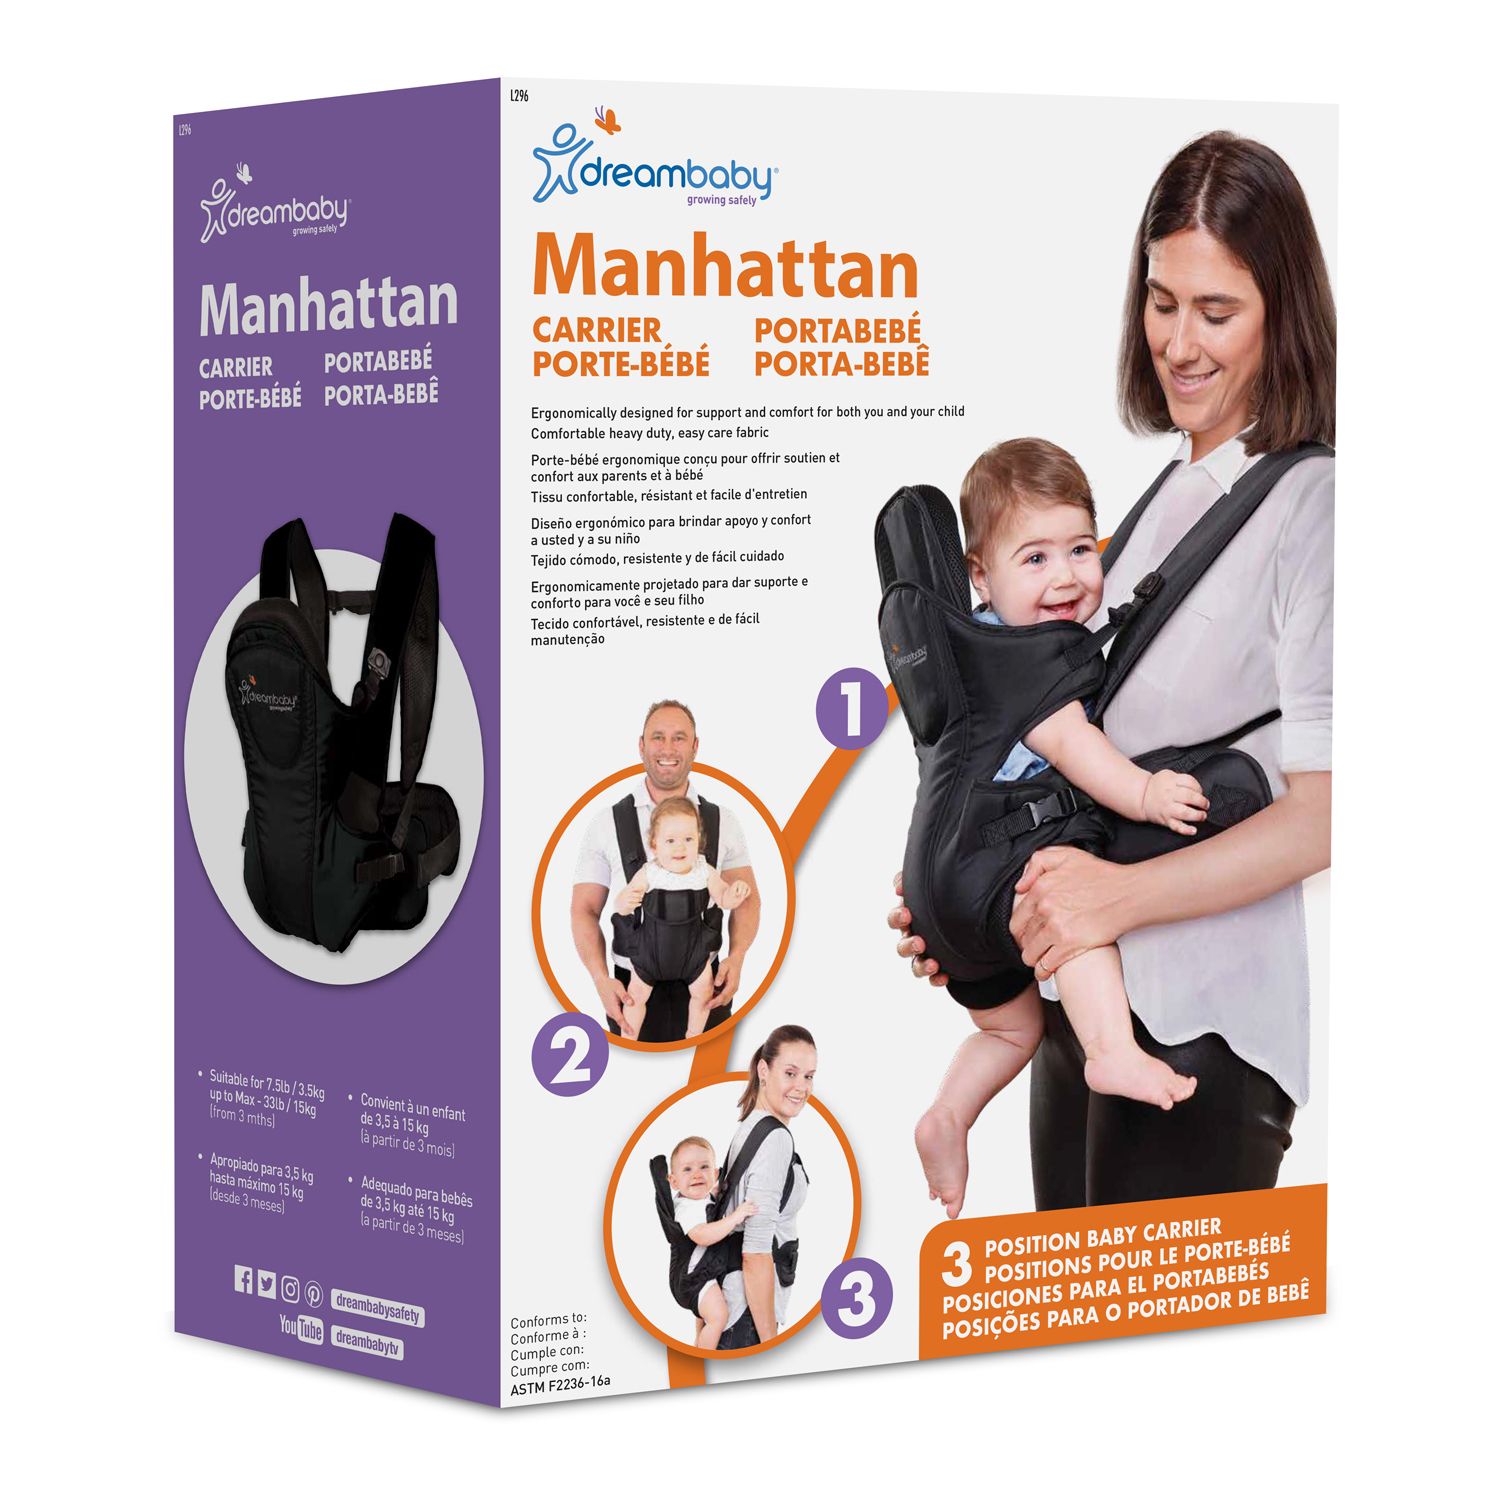 Image for Dreambaby Manhattan 3-Position Baby Carrier at Kohl's.